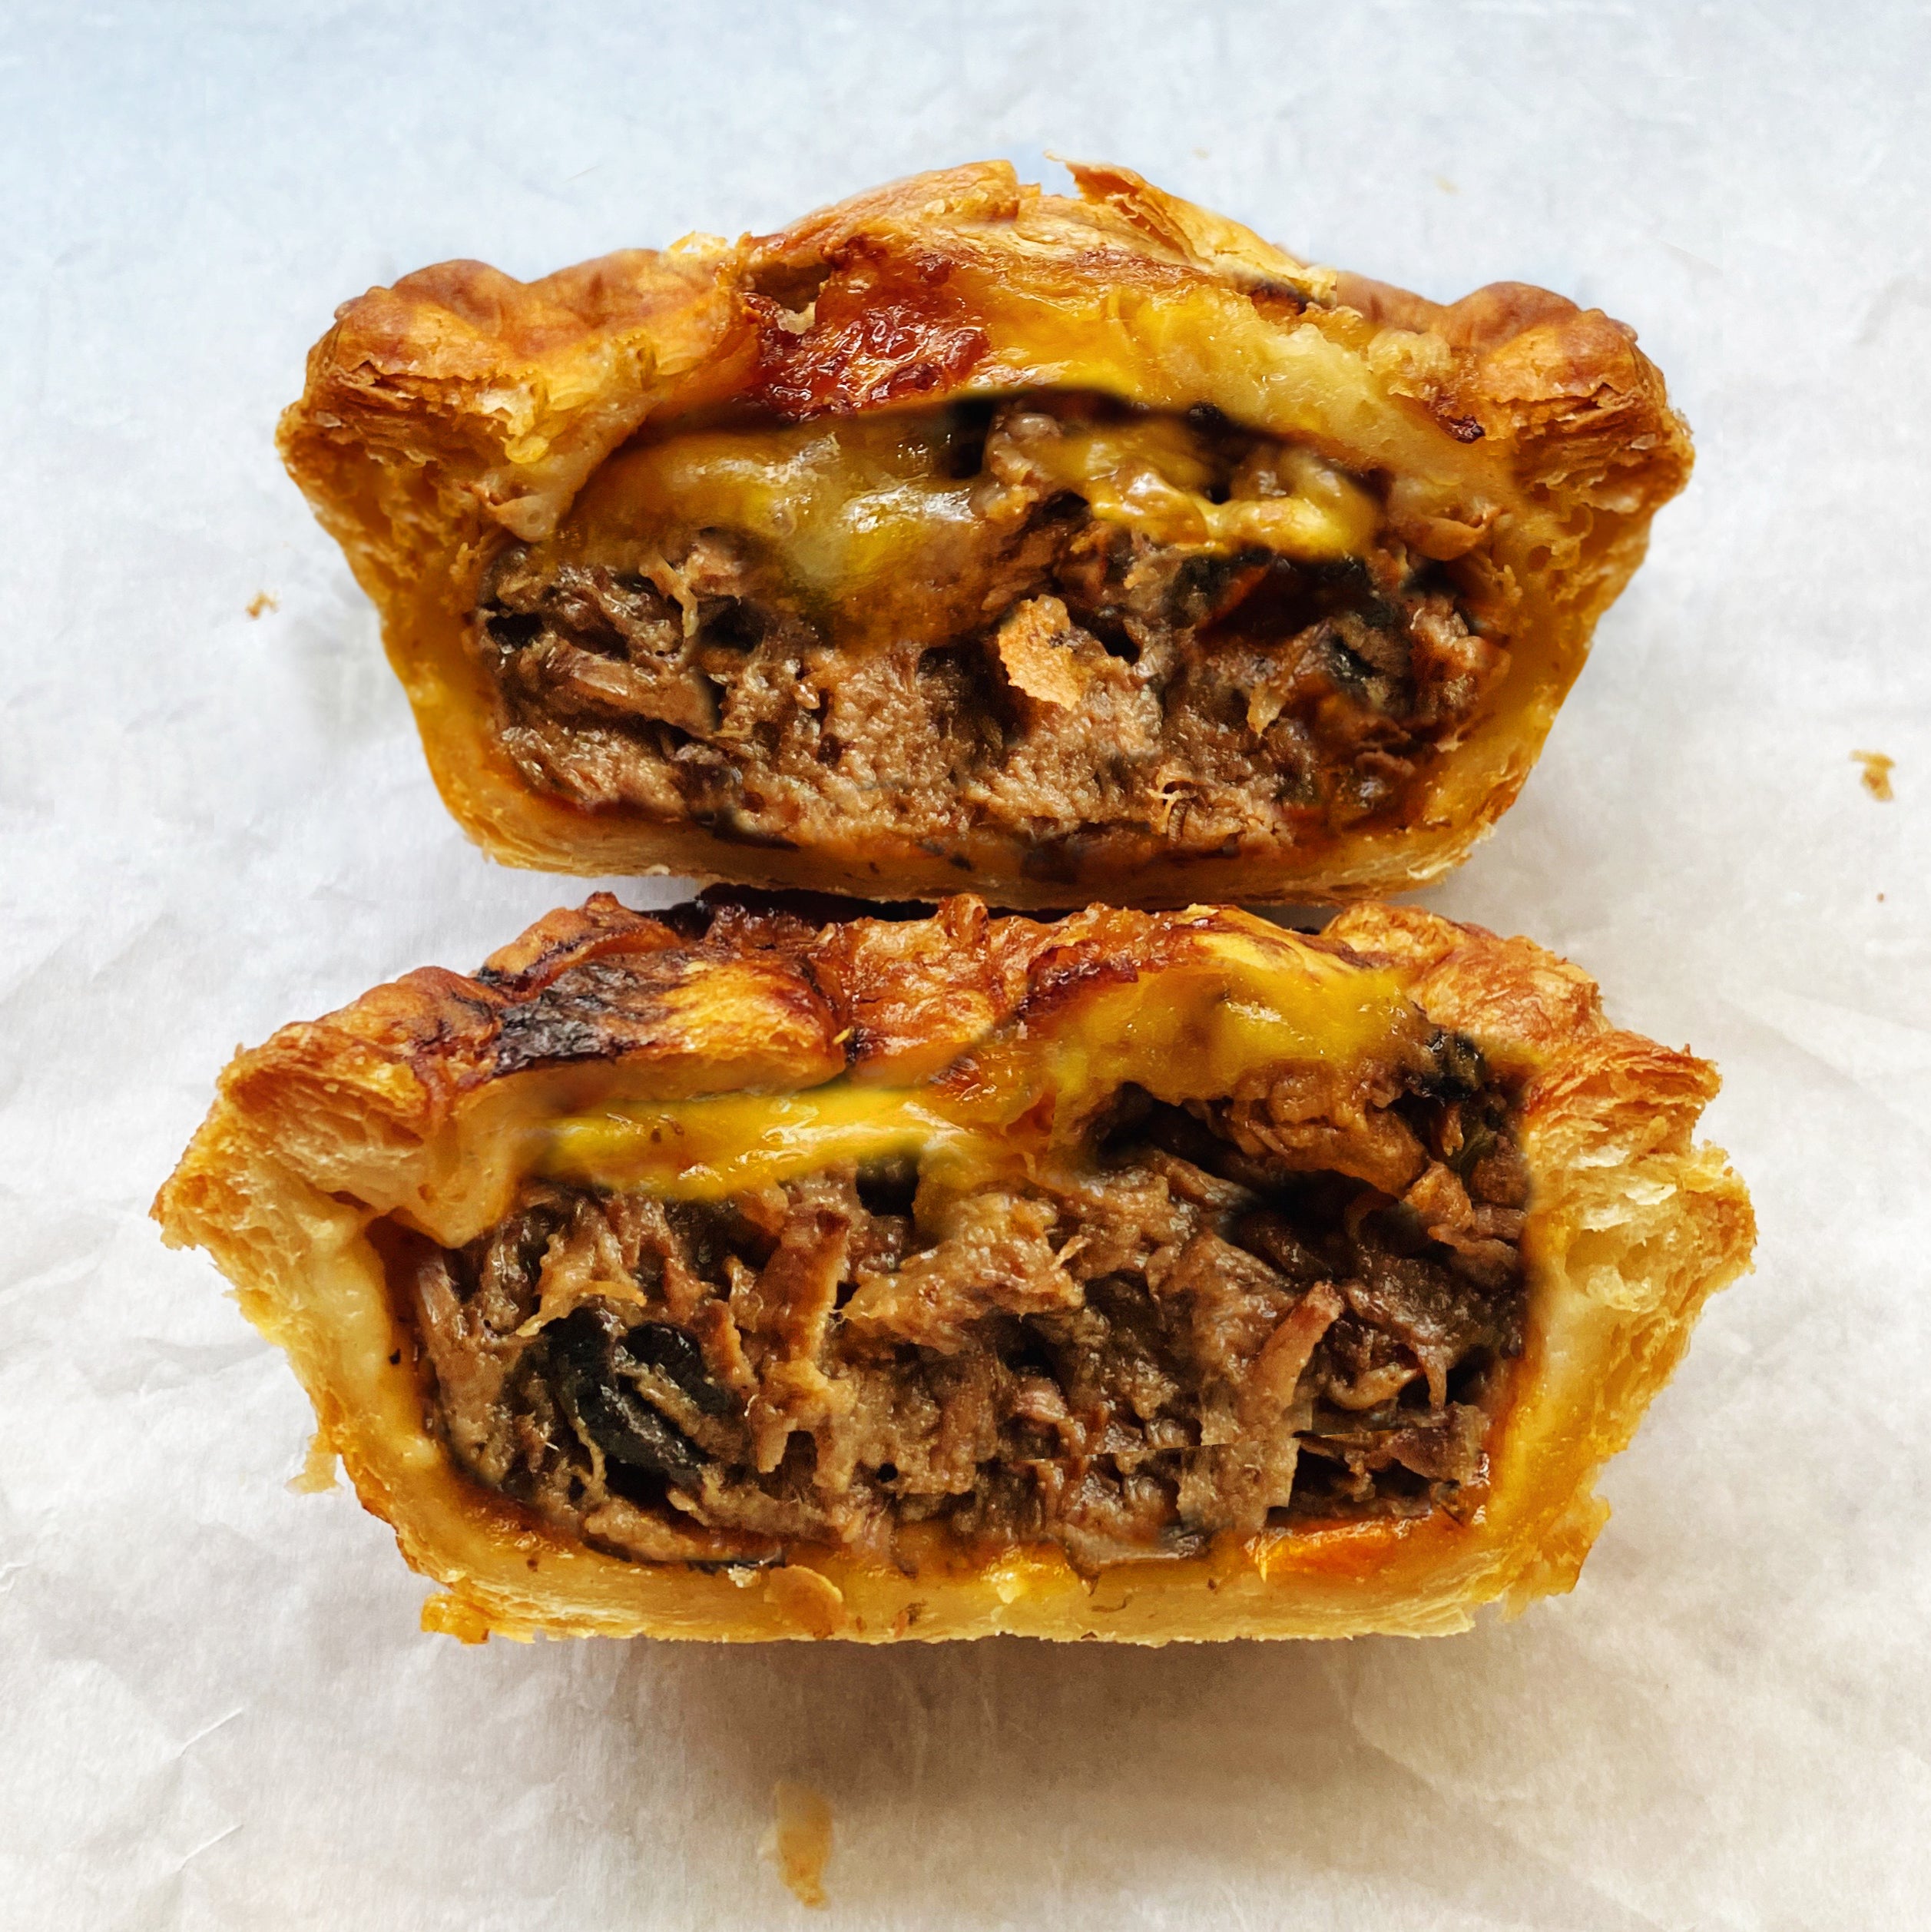 Cross section of a steak and cheese pie on parchment paper